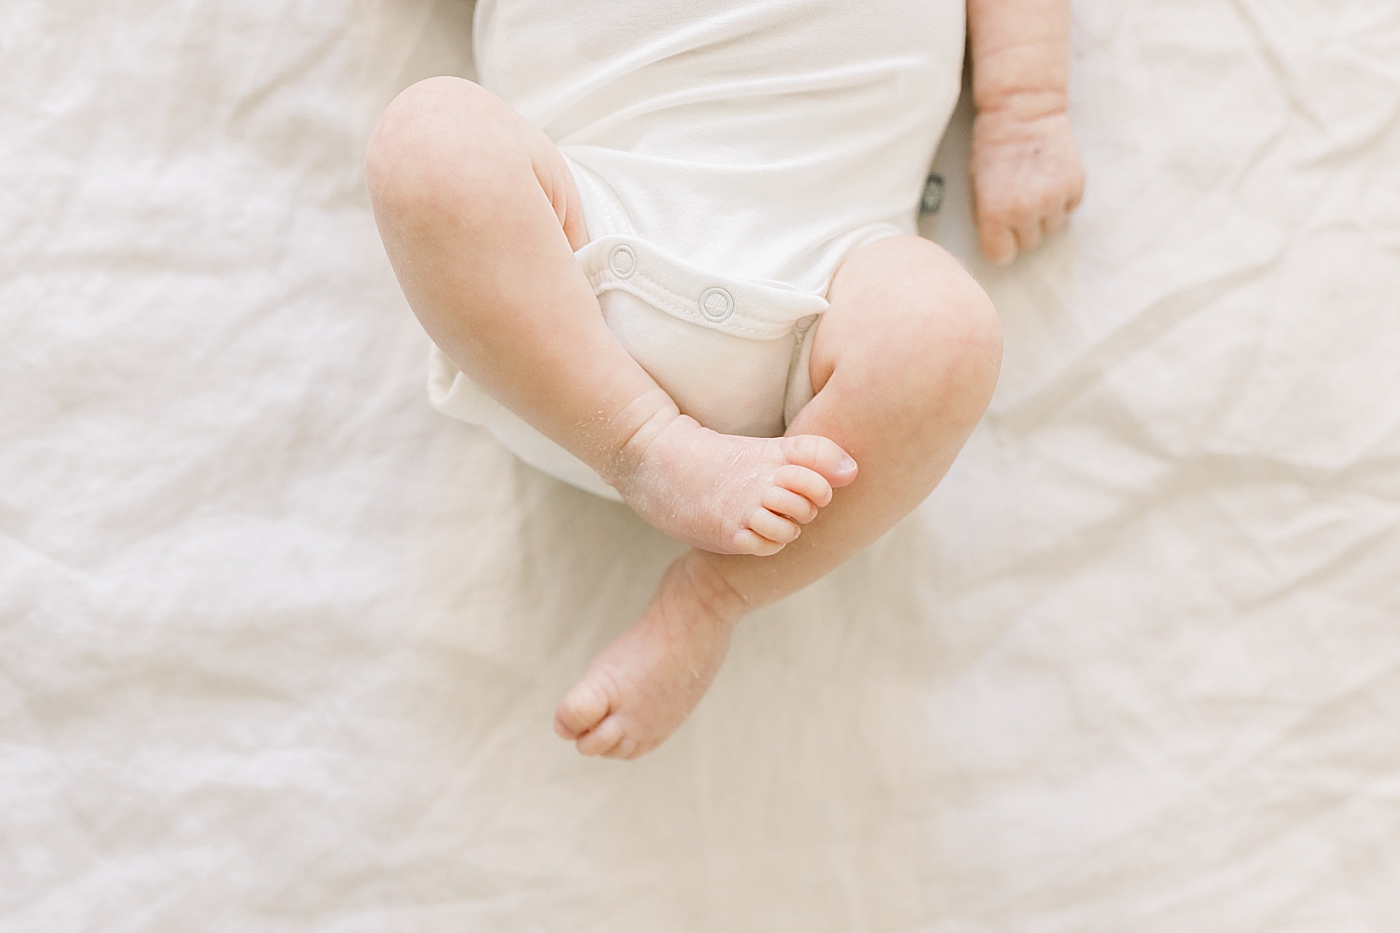 Detail of newborn baby's feet | Image by Caitlyn Motycka